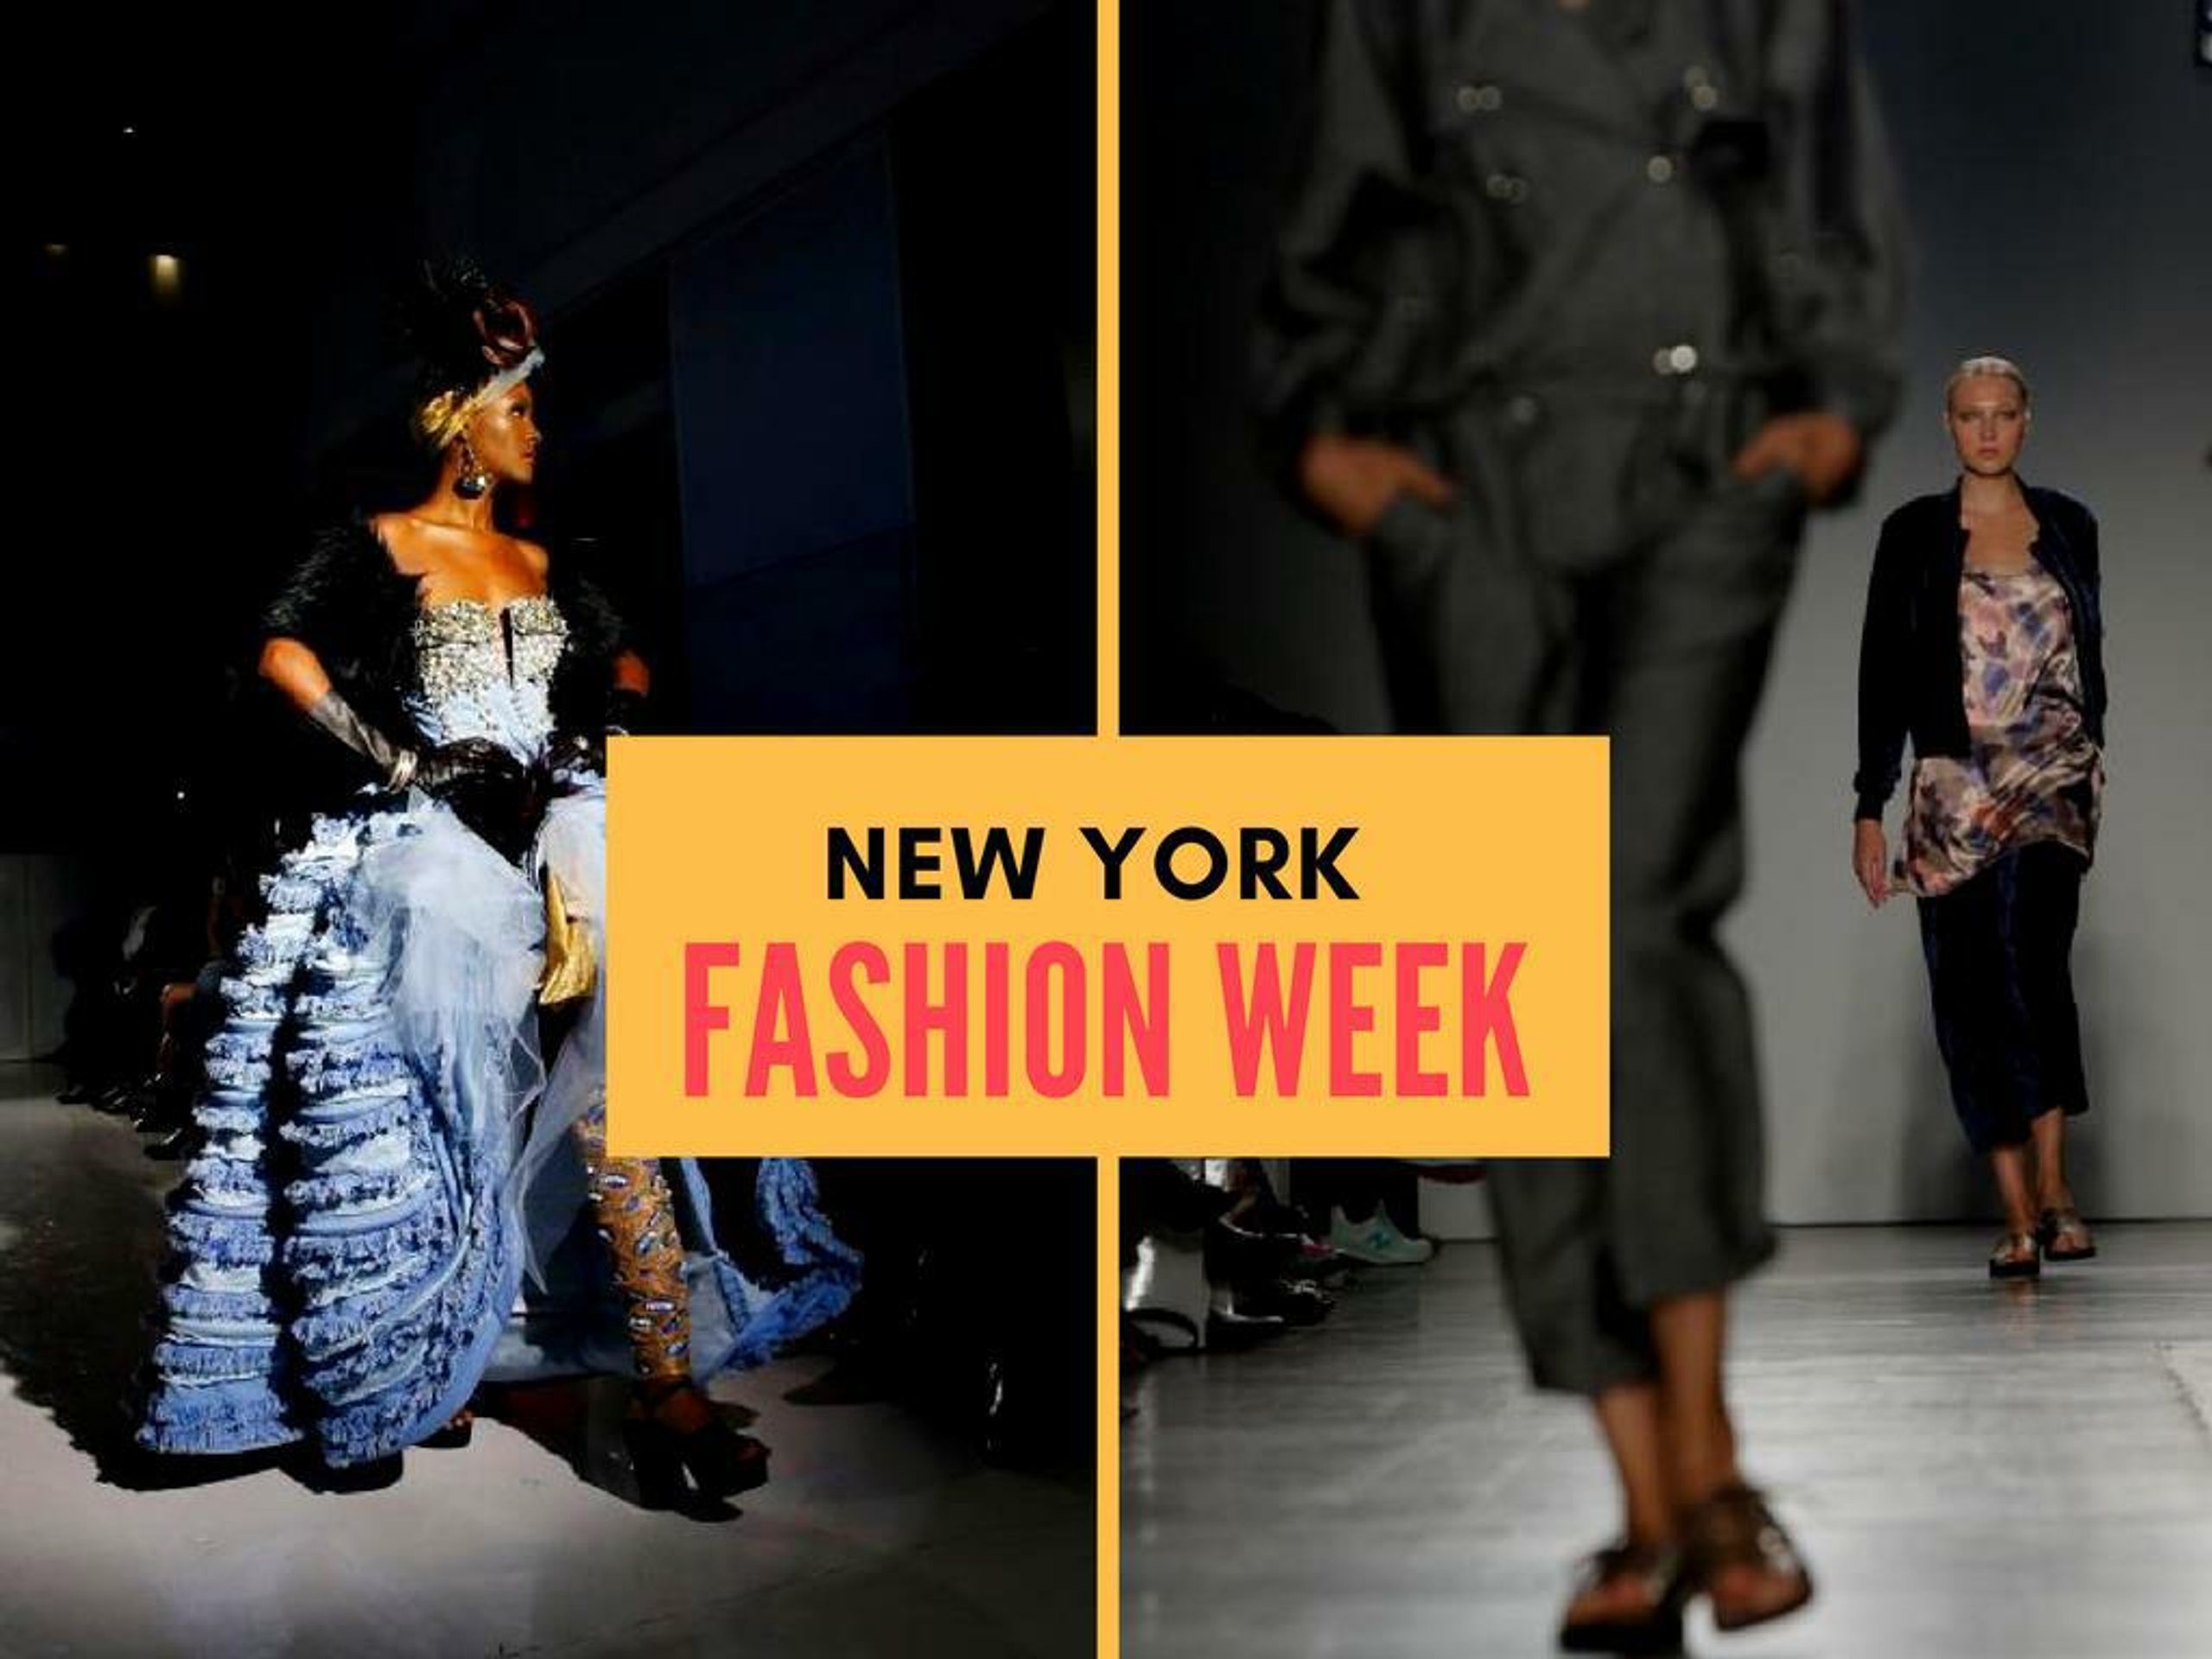 The New York Times > Fashion & Style > Slide Show > Slide Show: Pulse